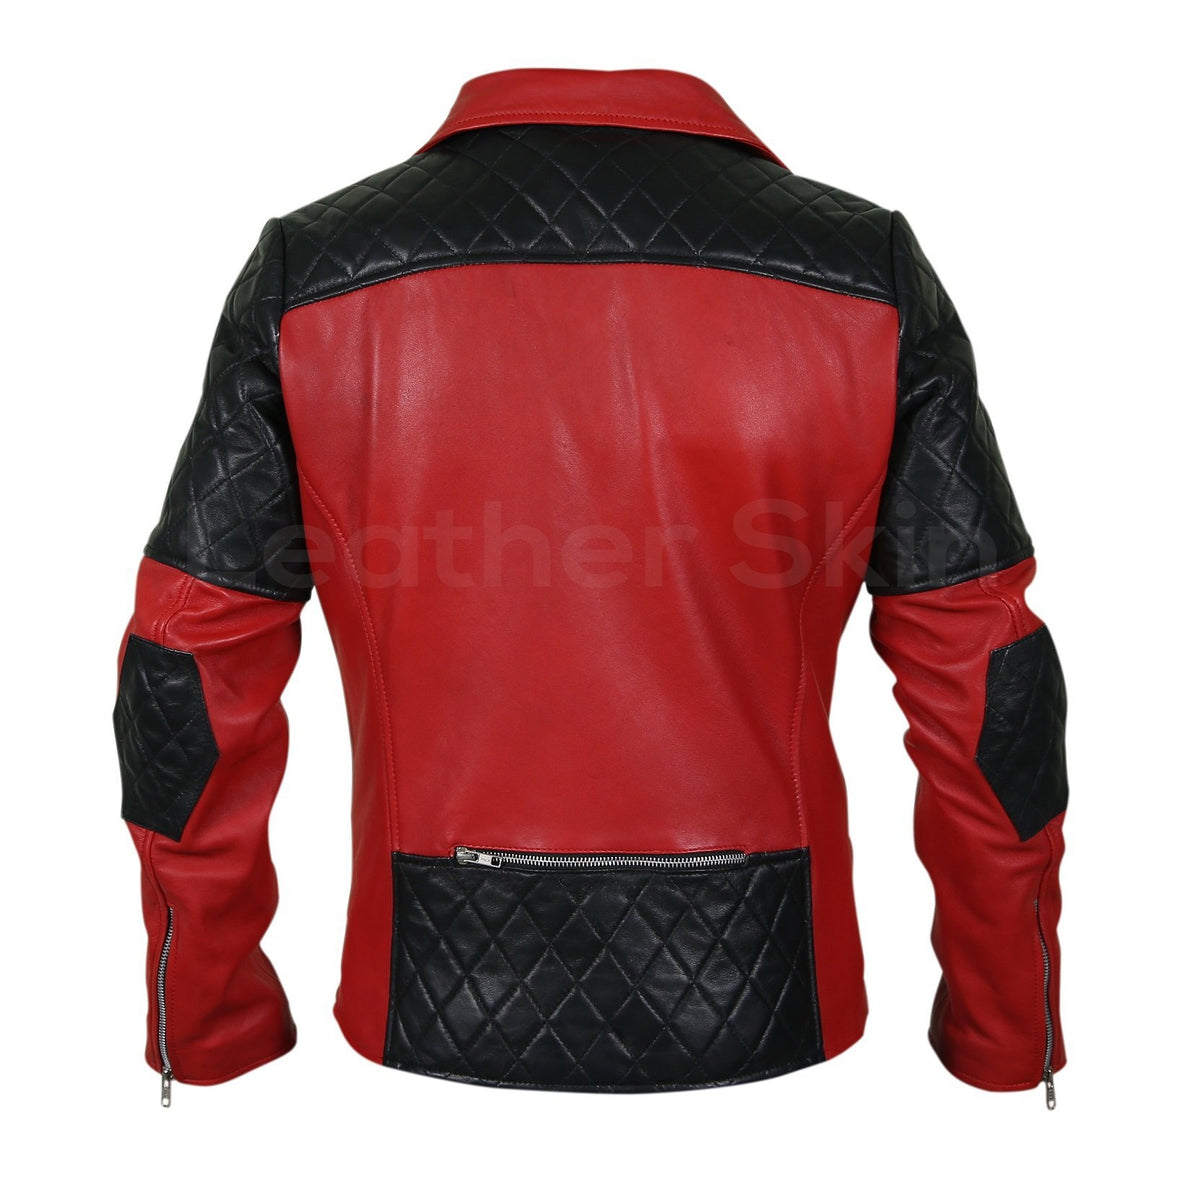 Understand About the Raw Materials for Jackets and Coats